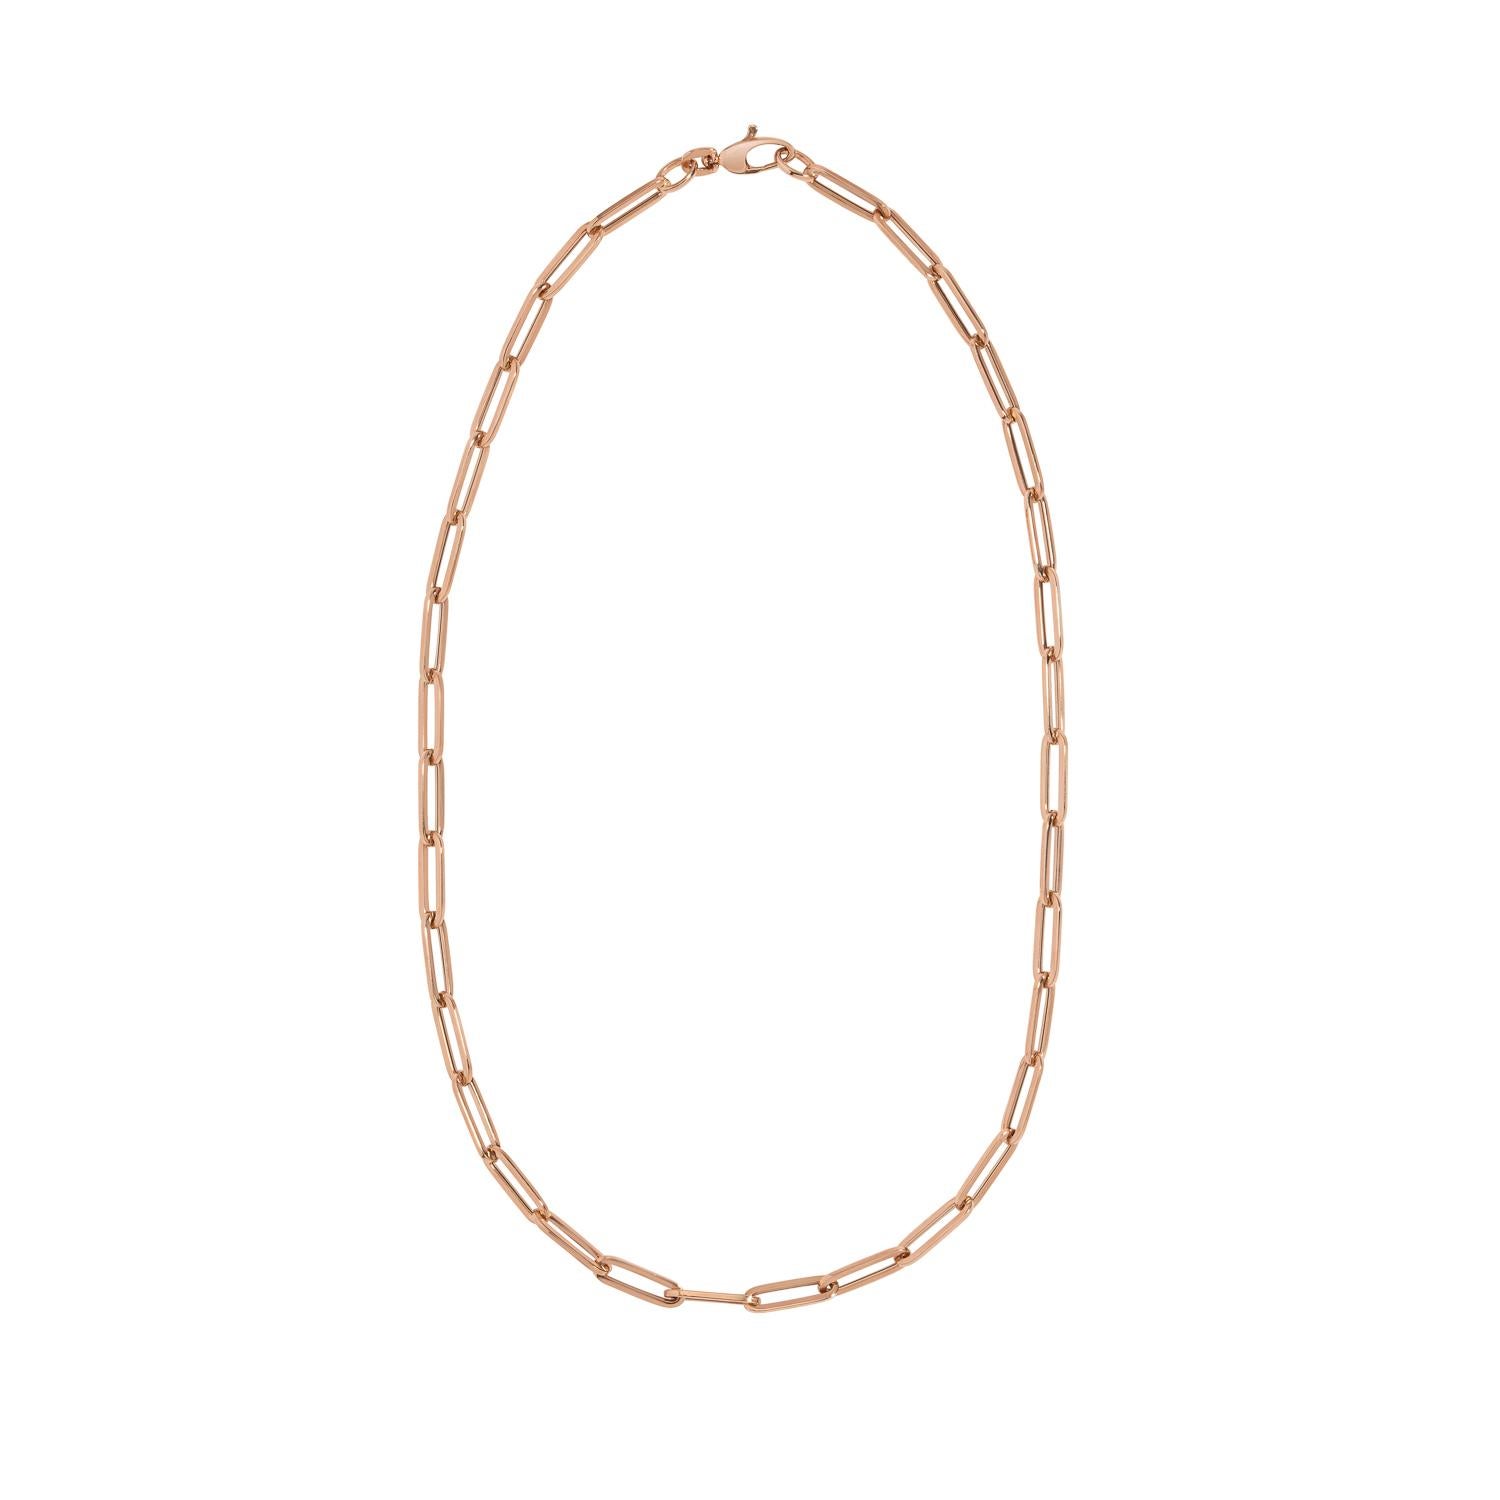 The search for the perfect chain ends here! 

- Solid 14k yellow gold
- 16'' 

Please allow 1-2 weeks for delivery as our pieces are handmade to order in New York